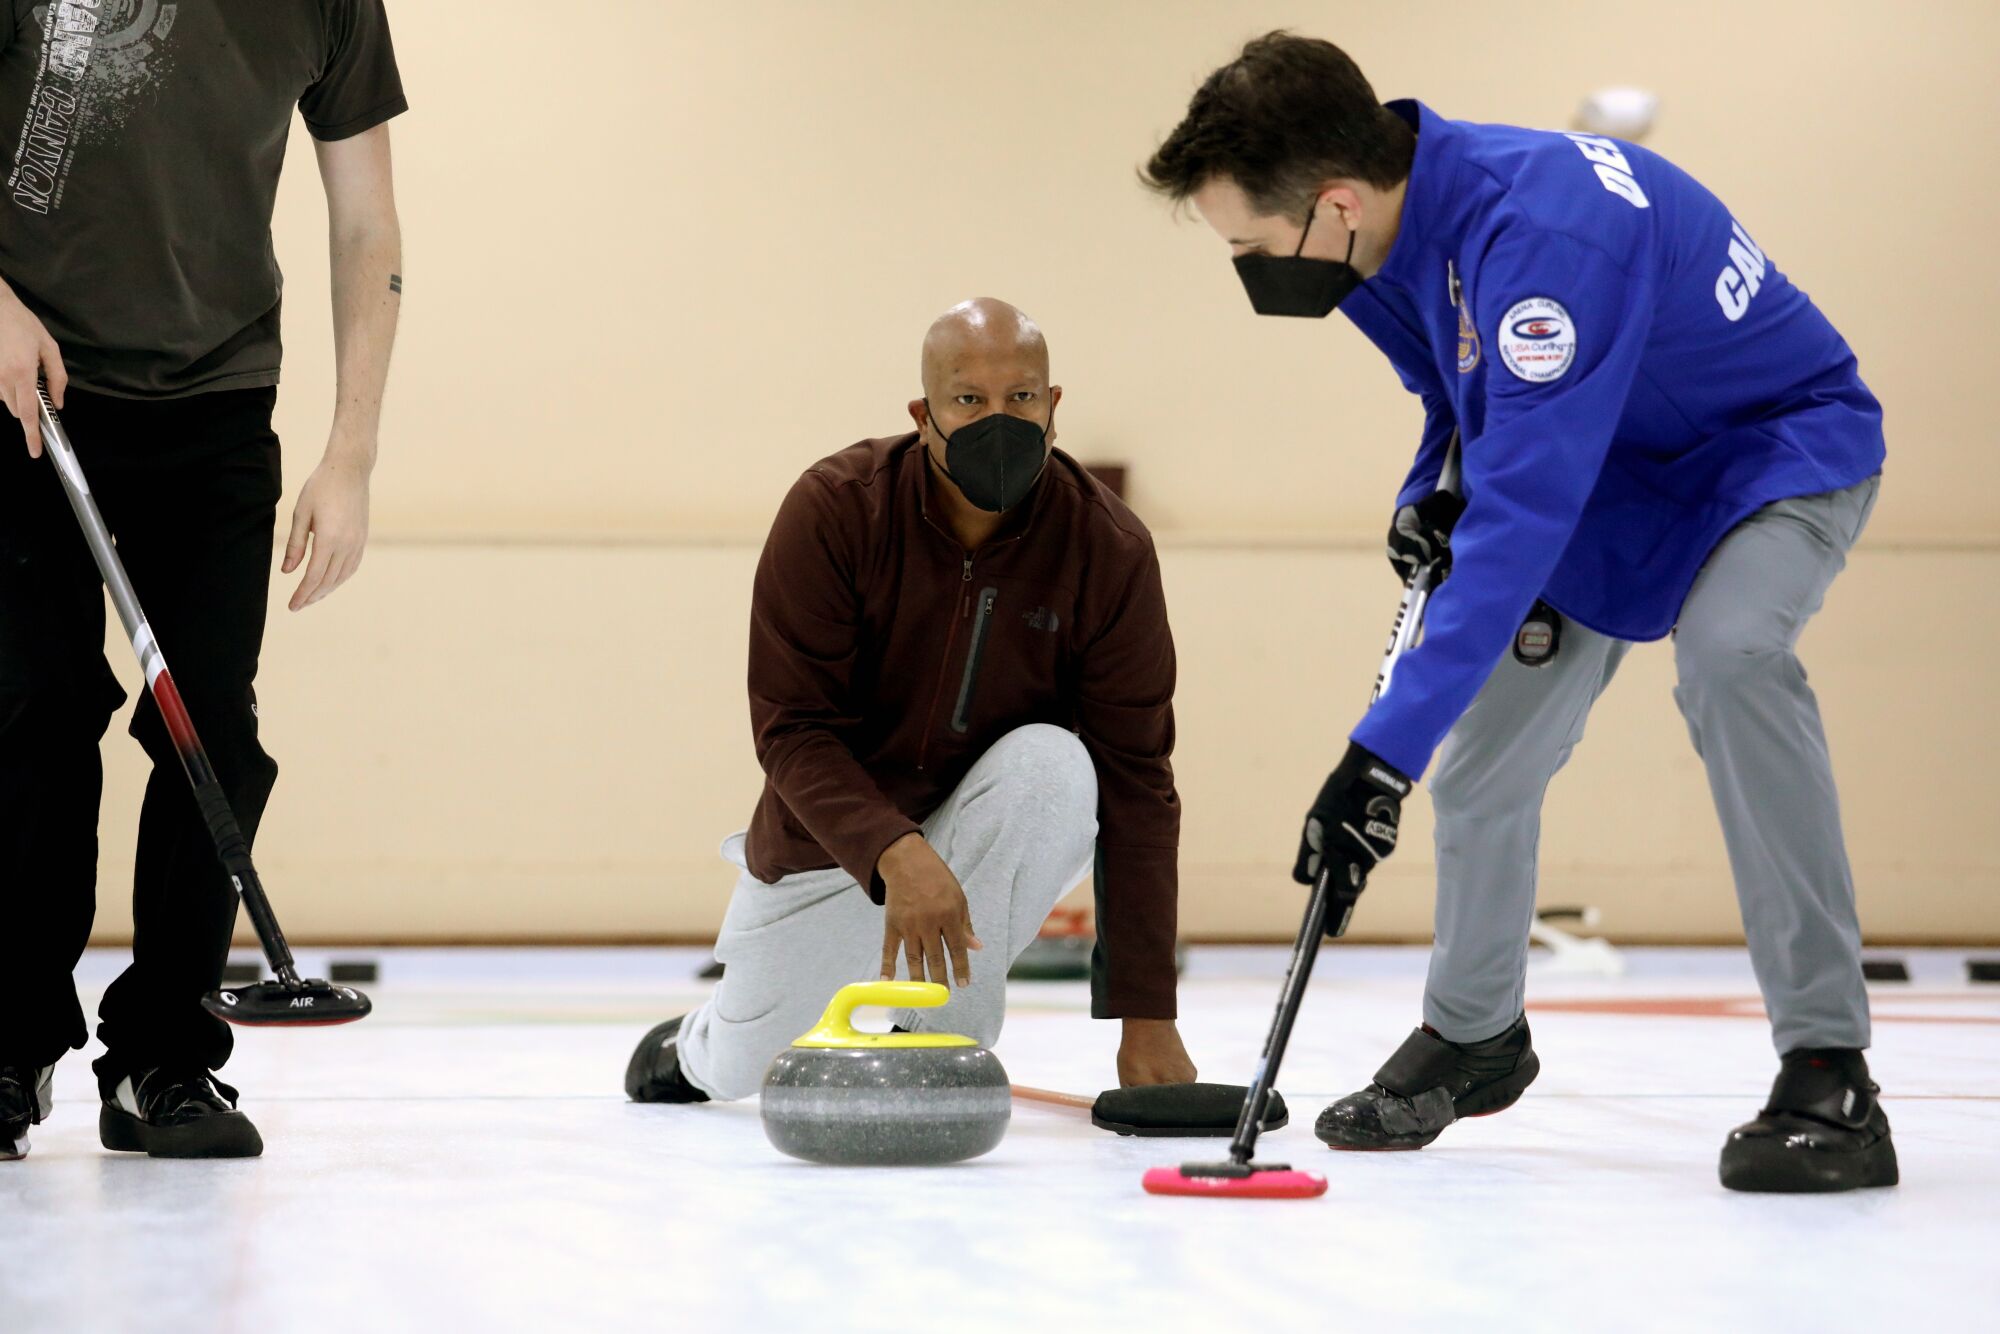 Jose Sepulveda, 53, center, of San Francisco, who aspires to be on the Puerto Rico national curling team.